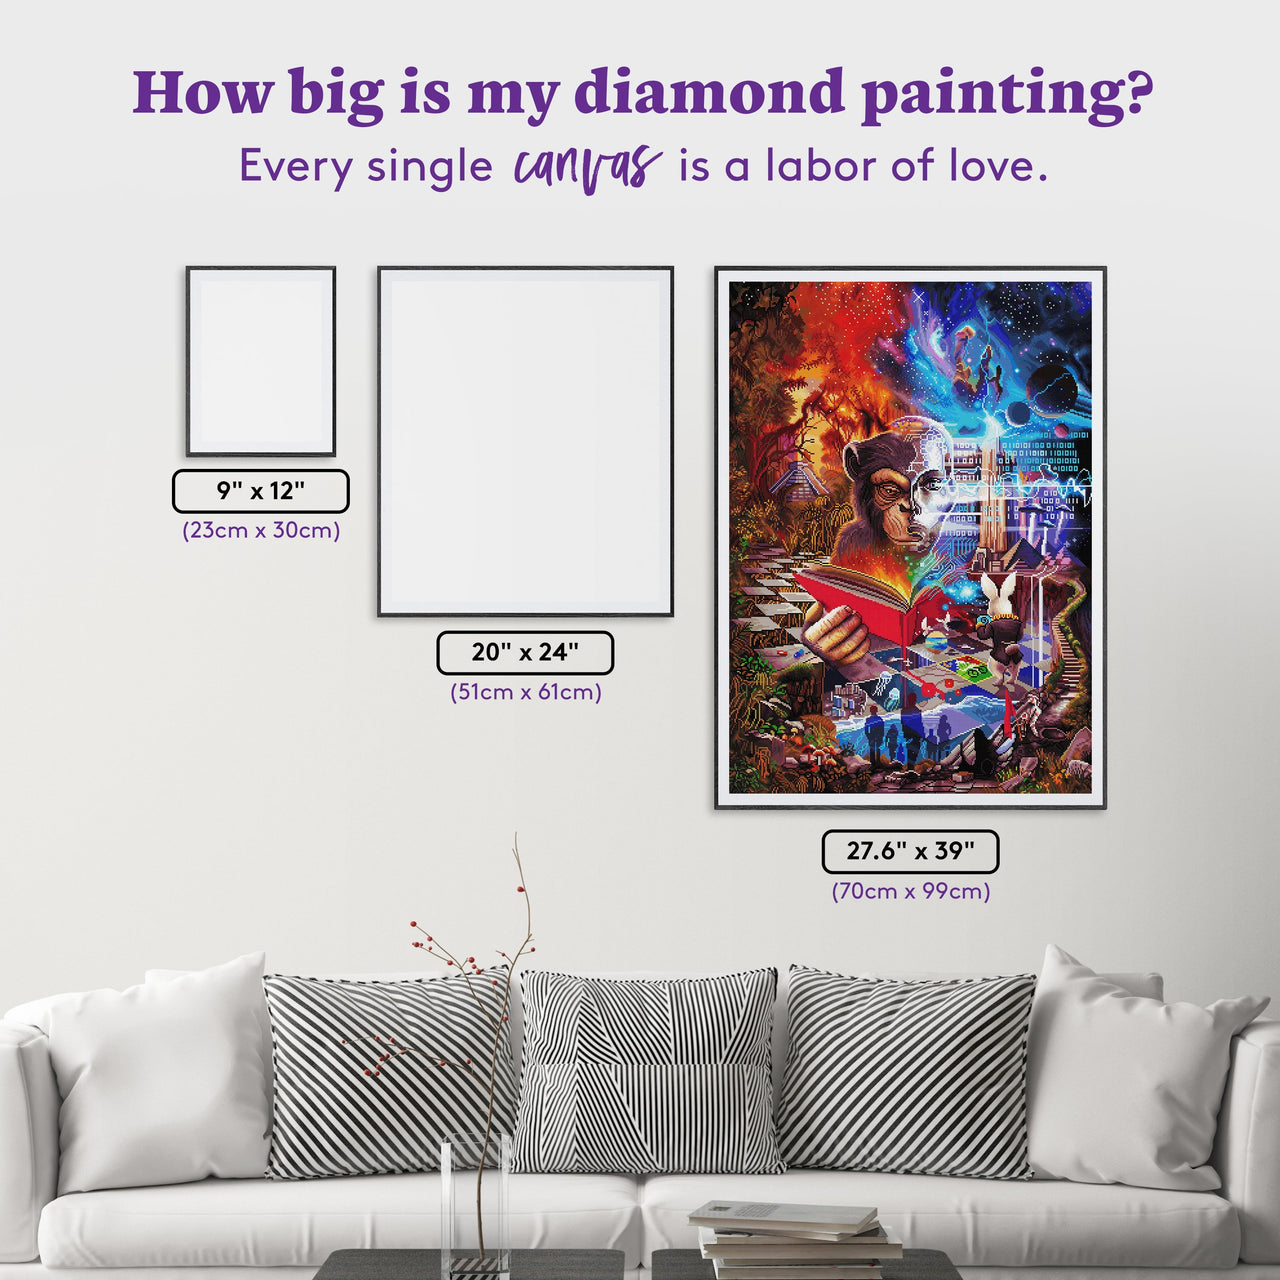 Diamond Painting A Question of Reality 27.6" x 39" (70cm x 99cm) / Square with 76 Colors including 5 AB Diamonds and 2 Fairy Dust Diamonds / 108,501